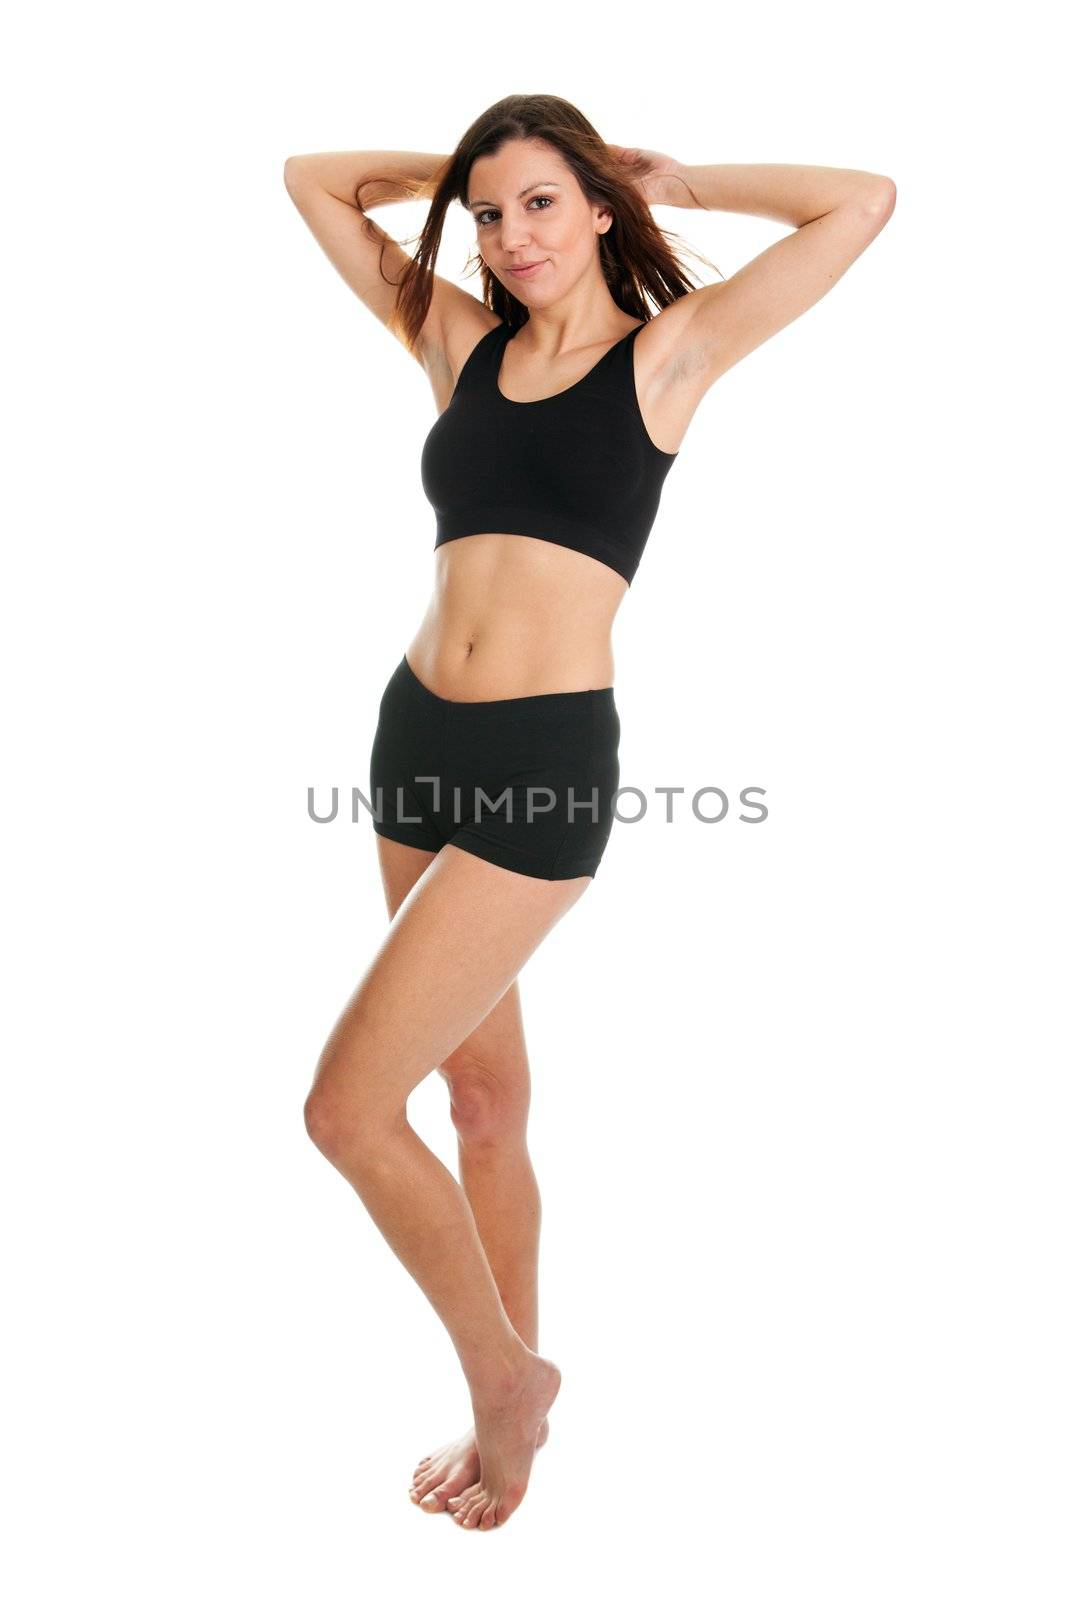 Portrait of smiling fitness women. Isolated on white